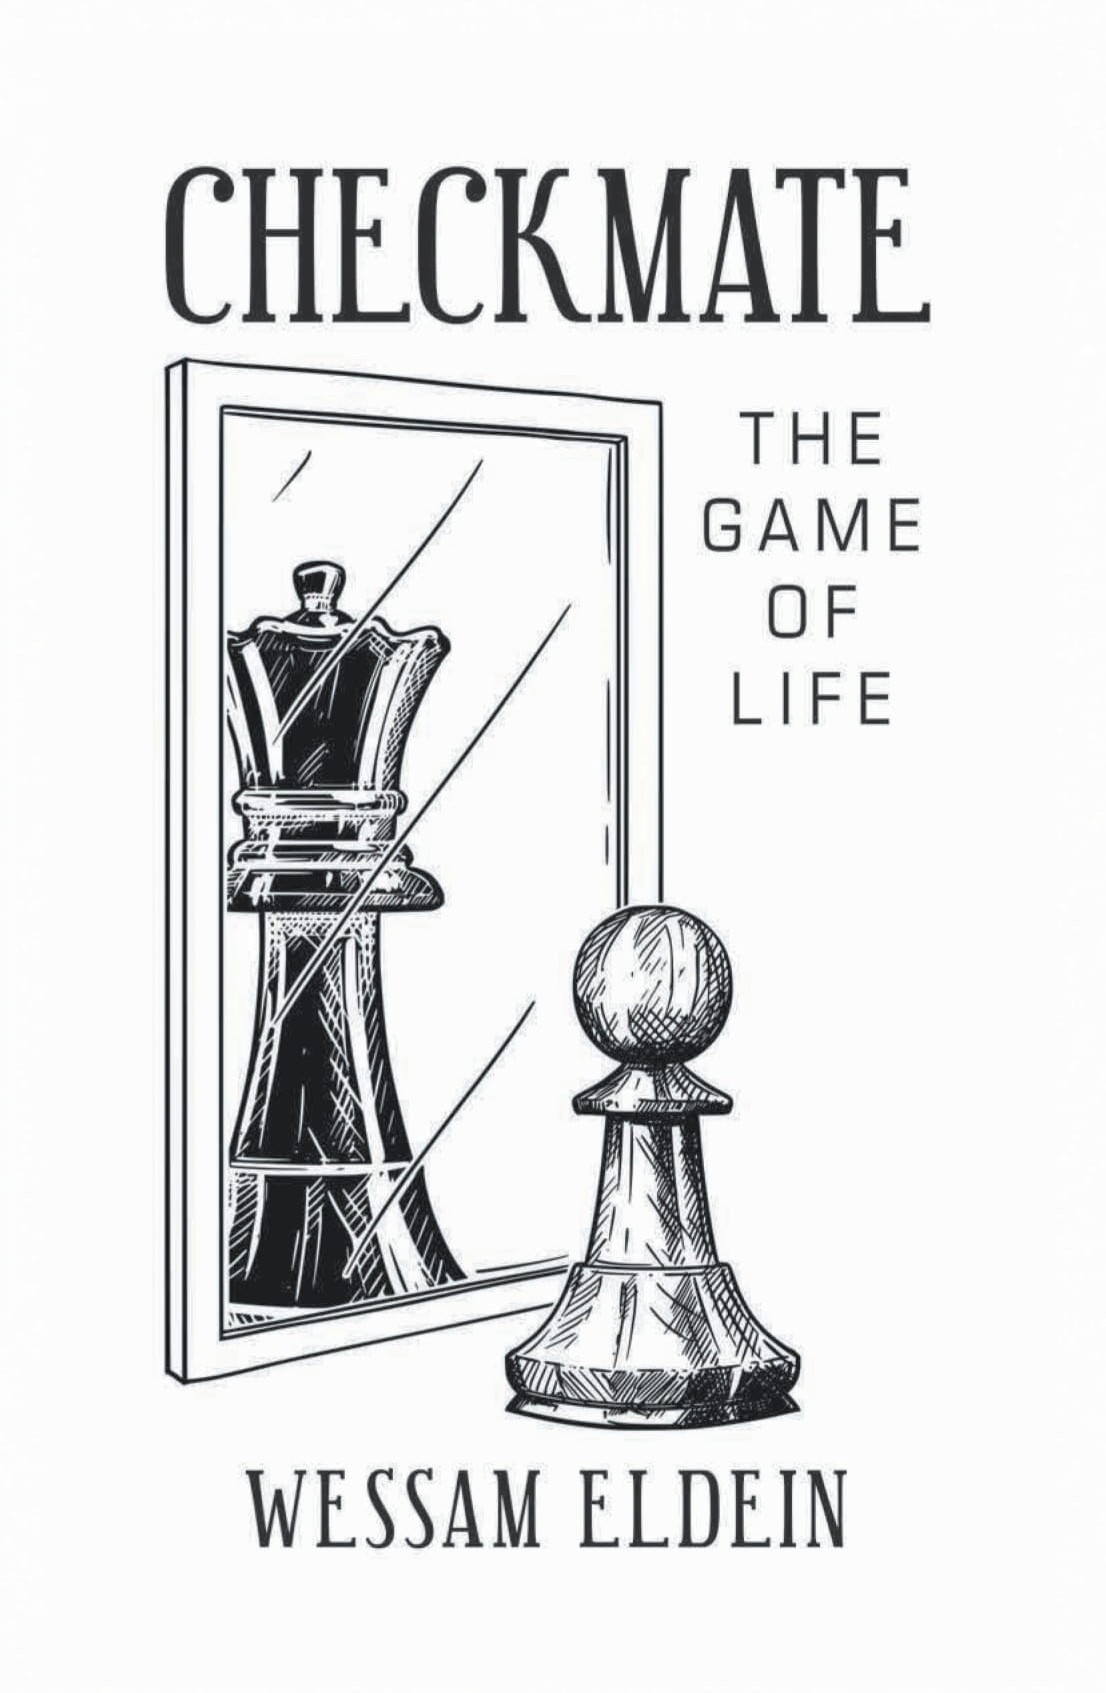 Checkmate: